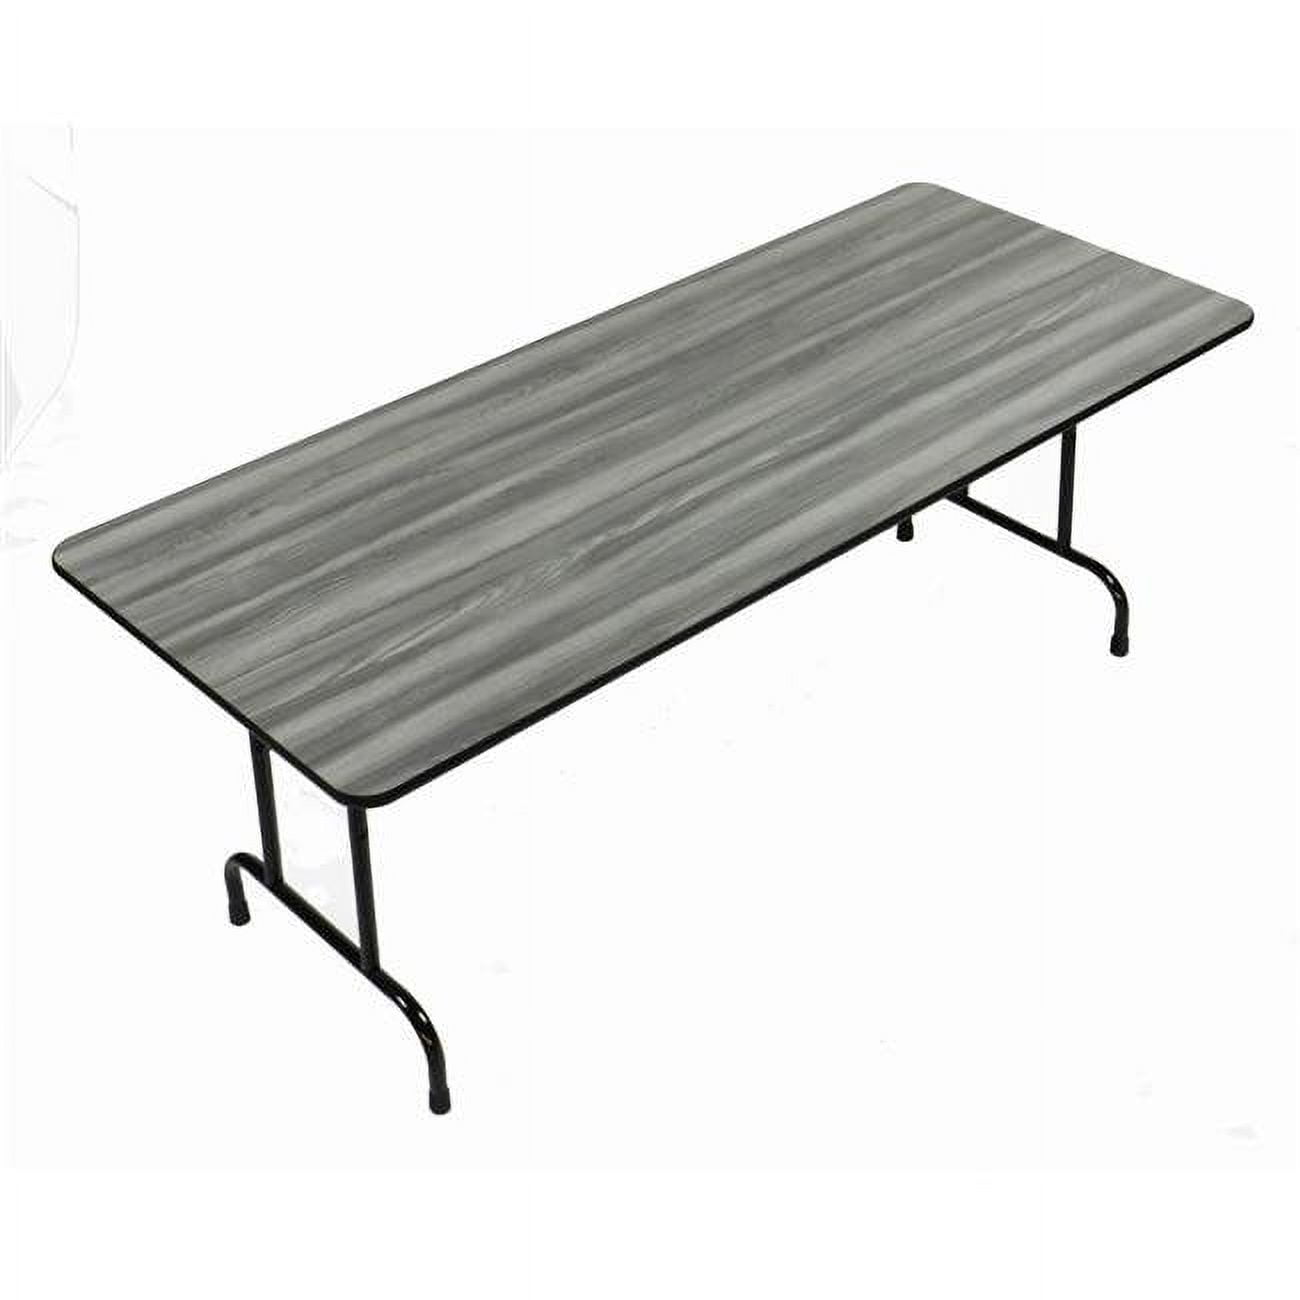 Cf3048px-52 0.75 In. High Pressure Rectangular Top Folding Tables, New England Driftwood - 30 X 48 In.